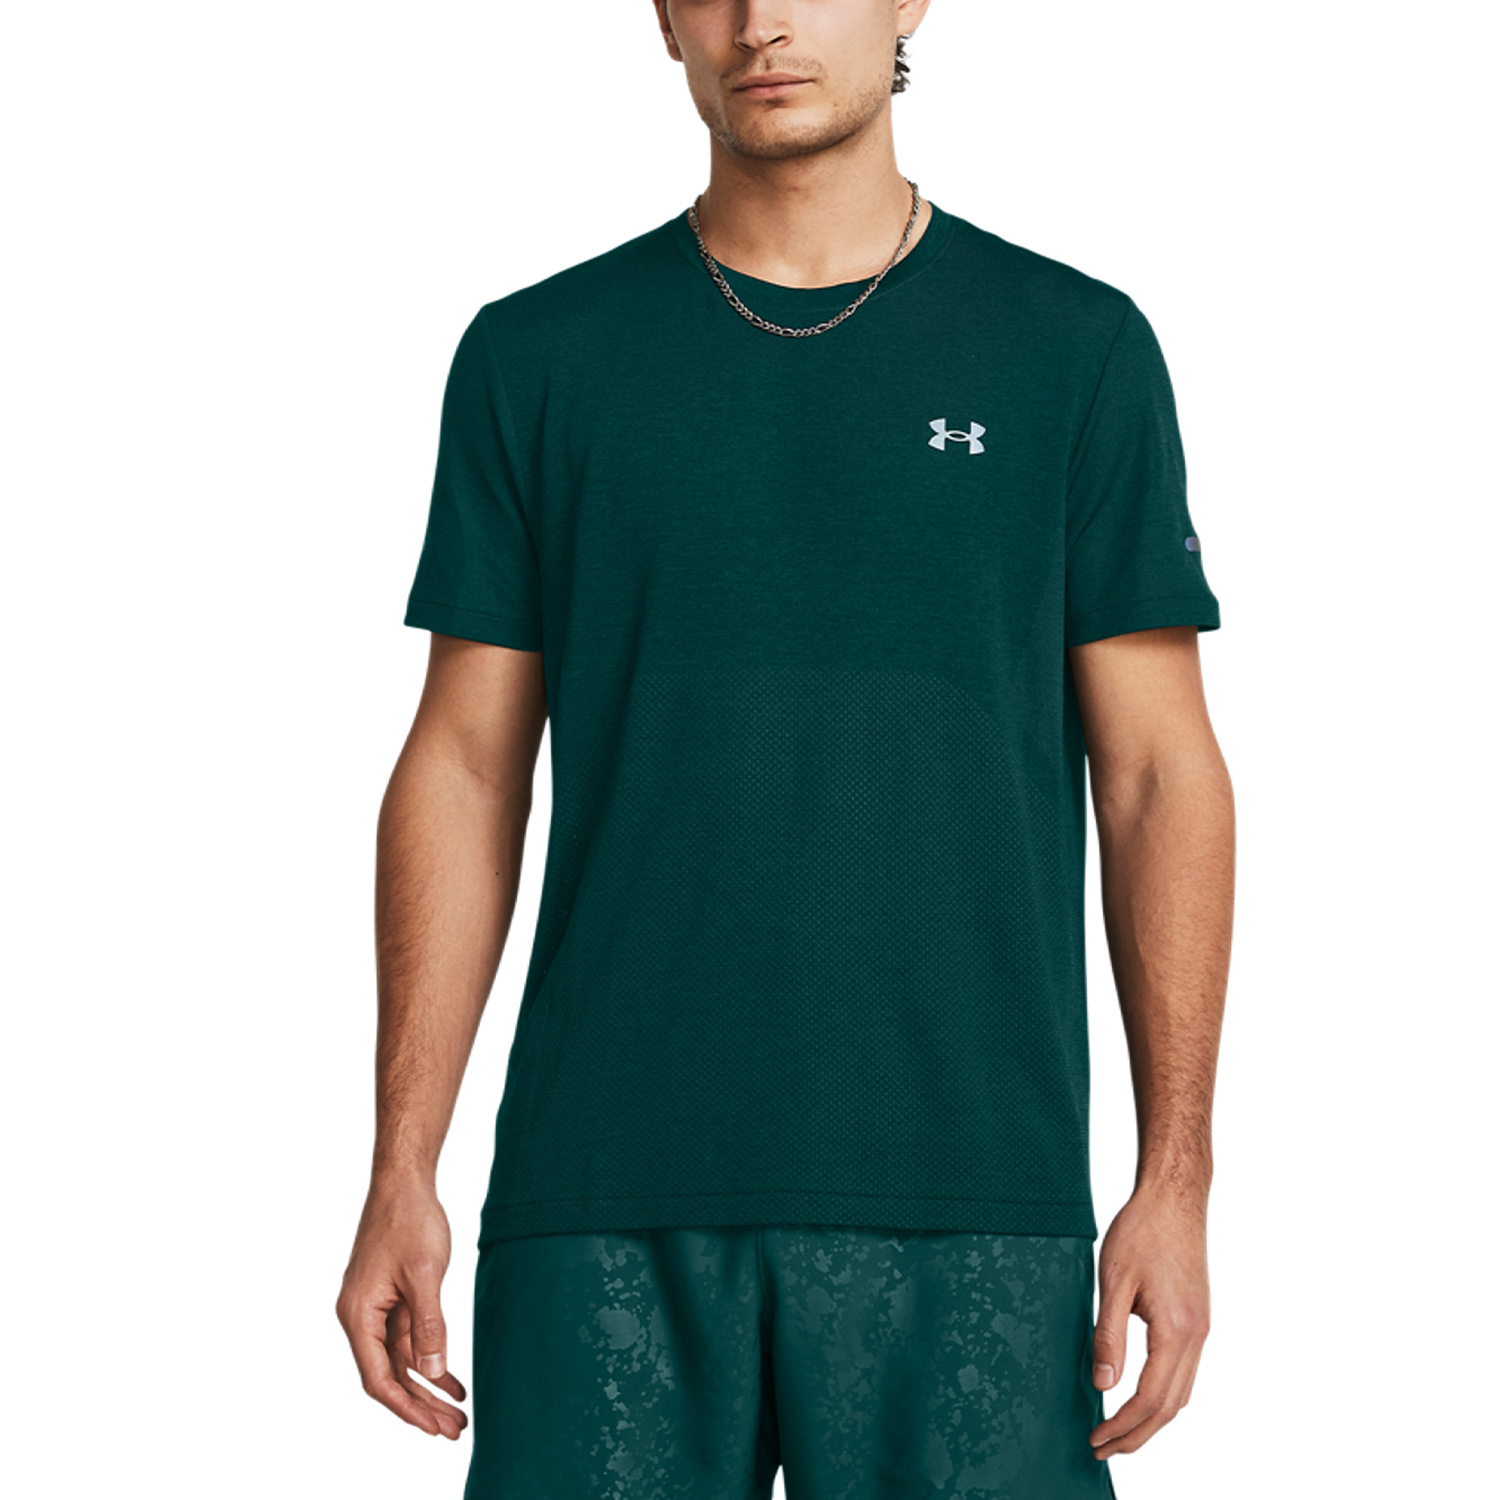 Under Armour Seamless Stride T-Shirt - Hydro Teal/Reflective